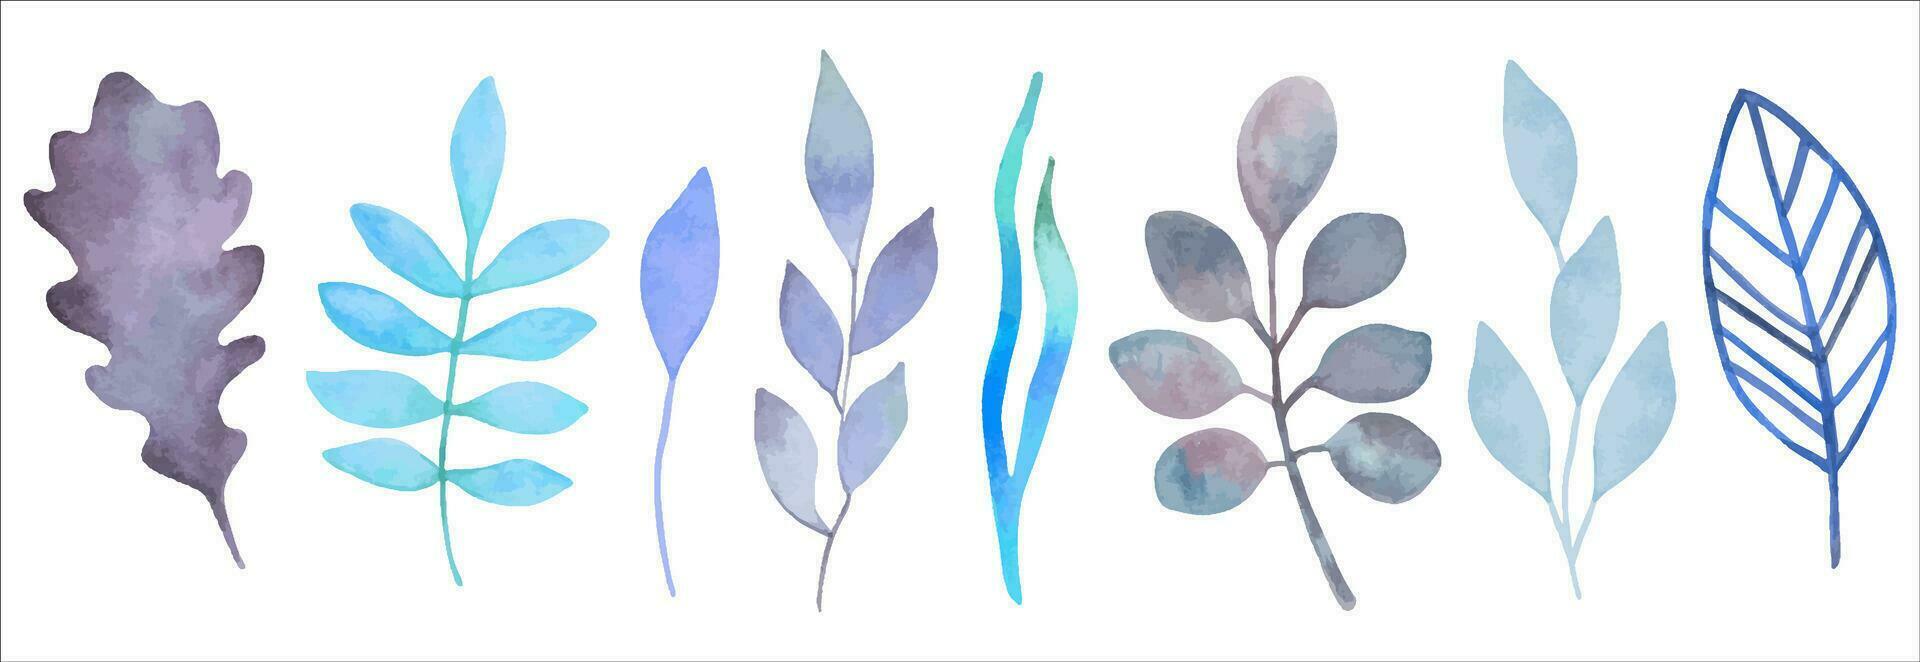 Collection of blue branches and leaves.Watercolor botanical clipart in winter colors. Simple minimalistic various shapes for the design of cards, invitations. Hand drawn isolated art. vector